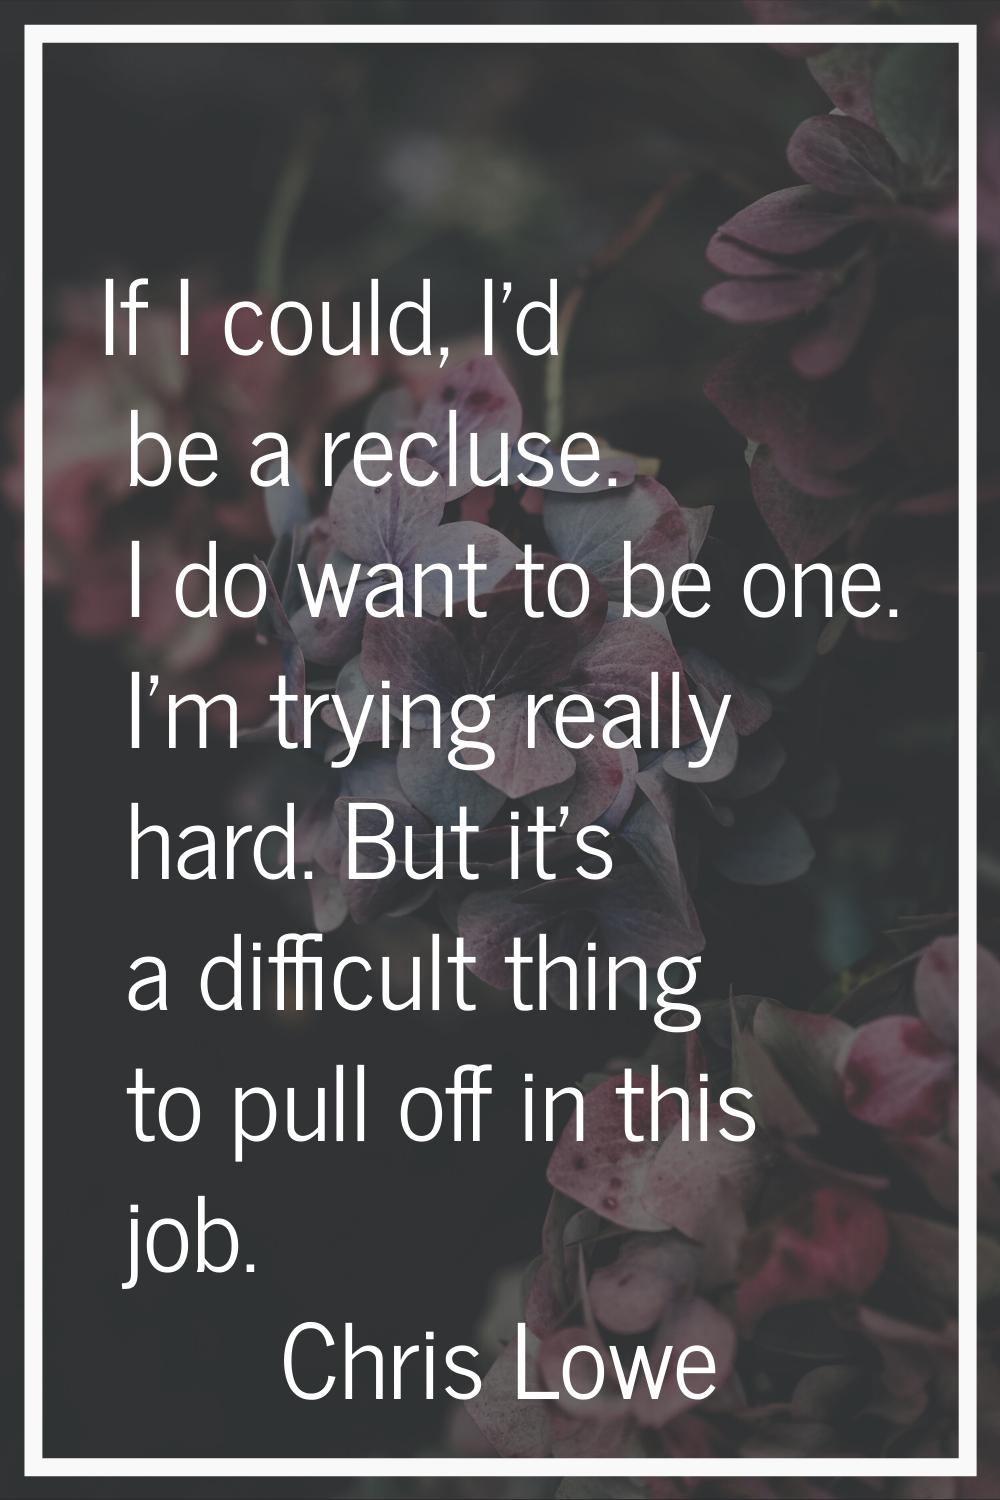 If I could, I'd be a recluse. I do want to be one. I'm trying really hard. But it's a difficult thi